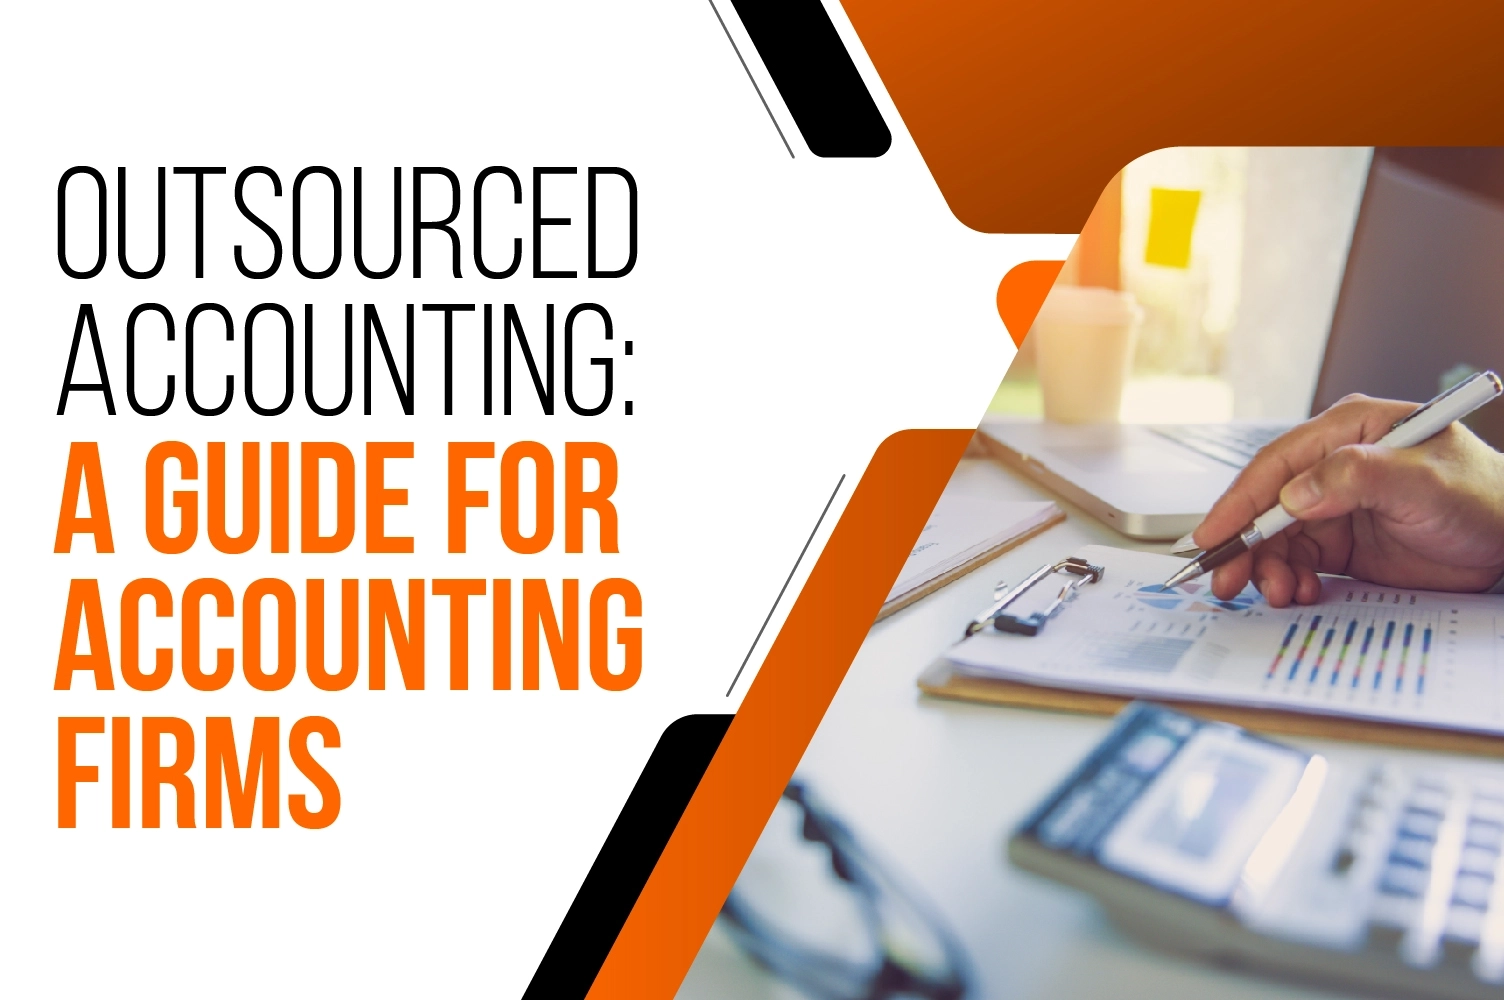 Outsourced Accounting: A Guide for Accounting Firms